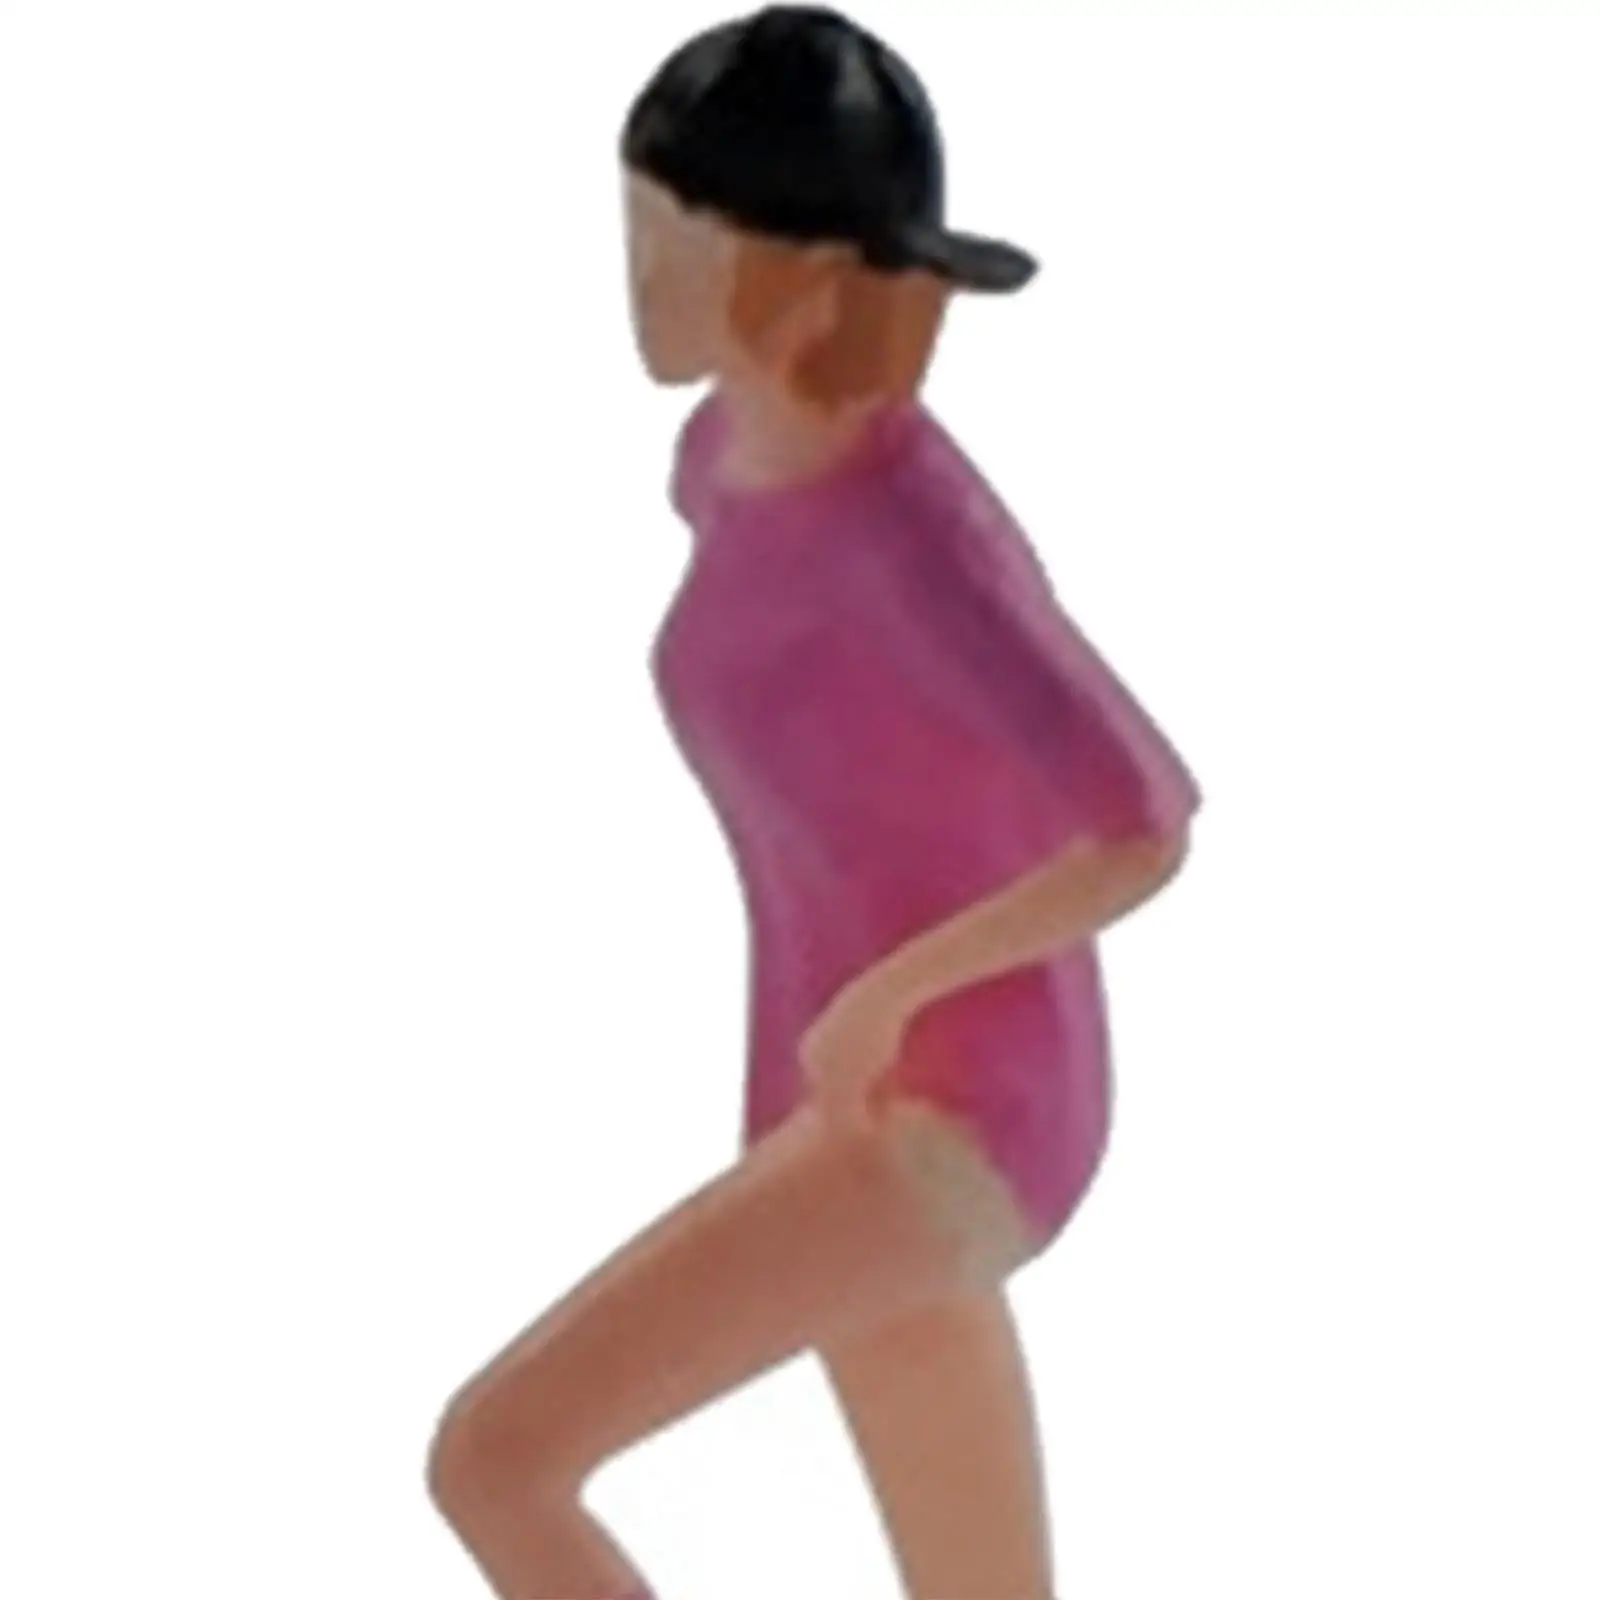 Realistic 1:64 Figure Skateboard Girl Handpainted for Sand Table Layout